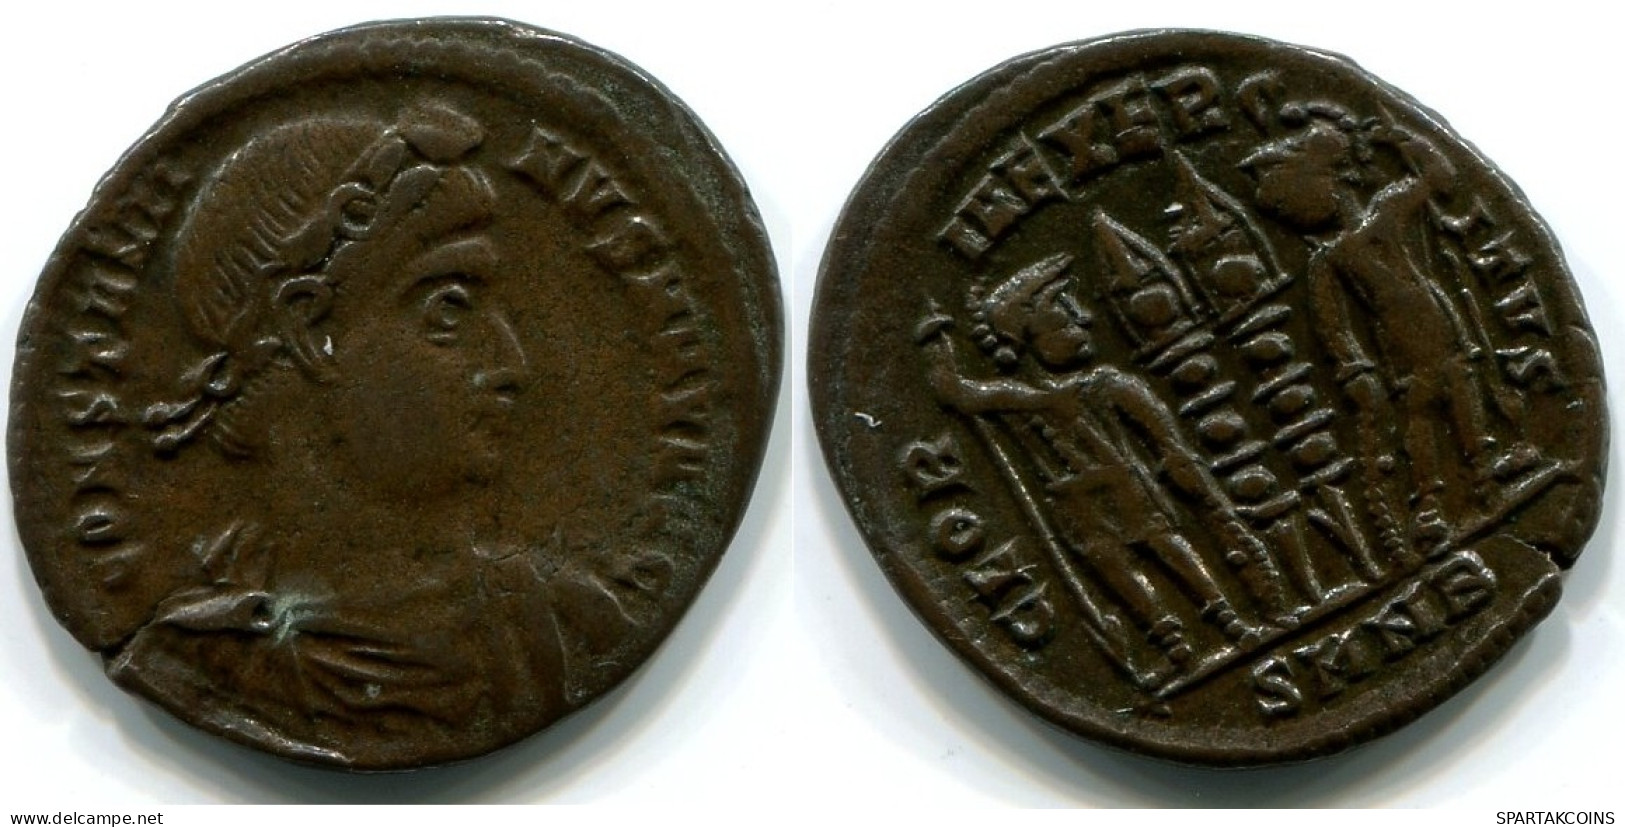 CONSTANTINE II Nicomedia Mint SMNB AD330-336 GLORIA EXERCITVS Two #ANC12462.10.D.A - The Christian Empire (307 AD To 363 AD)